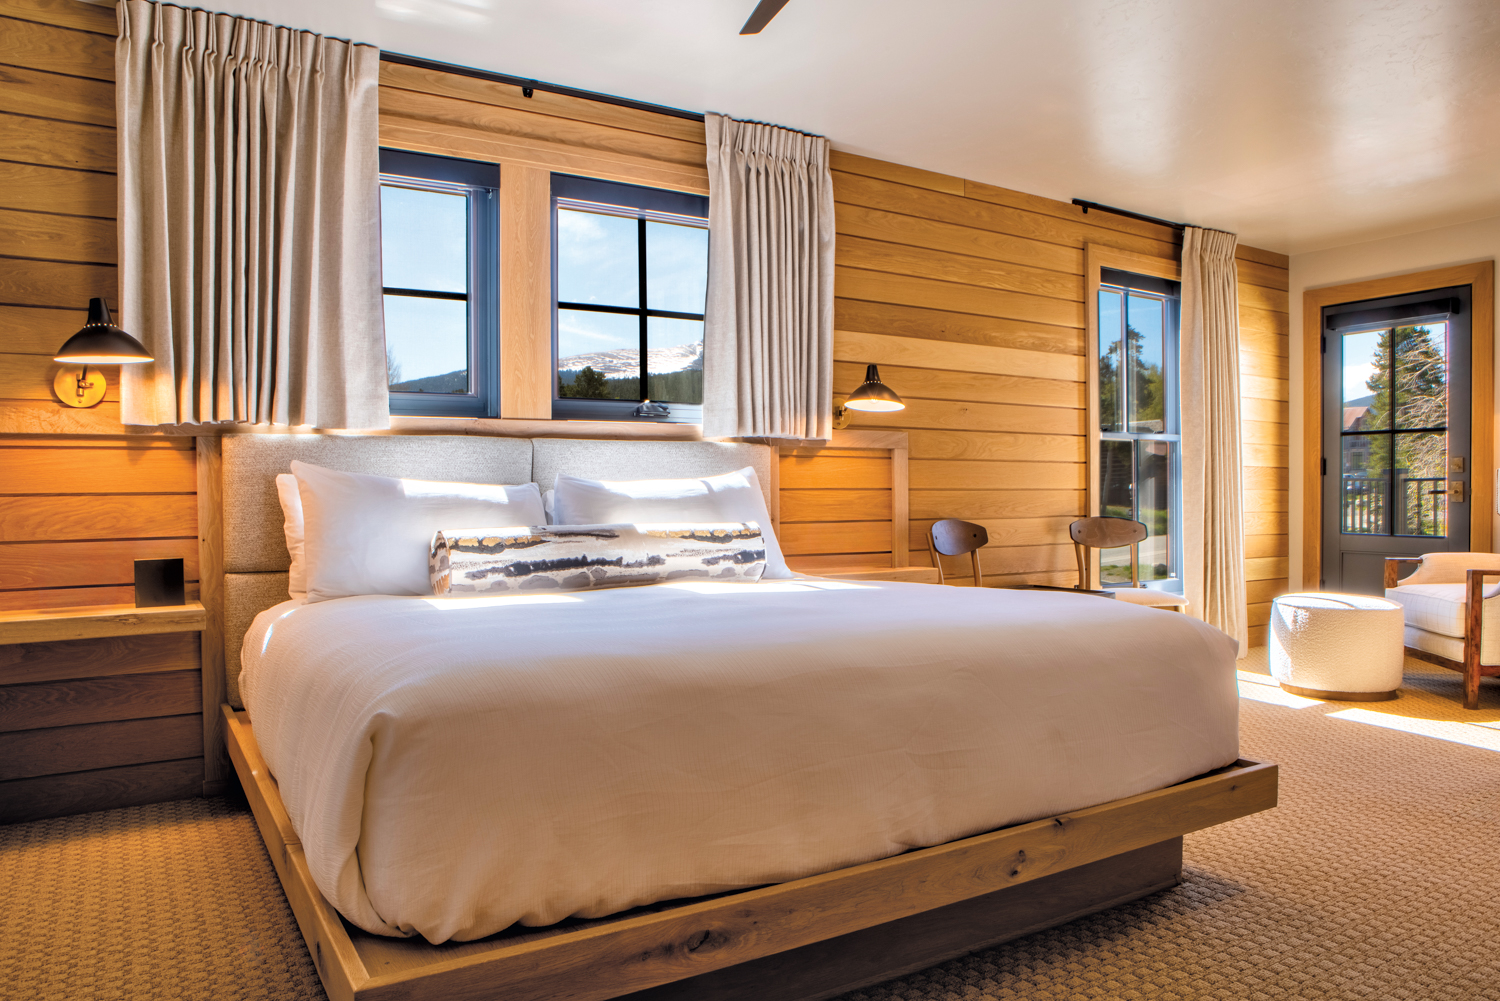 Hotel room with wood-plank walls and a bed and bedroom furniture in neutral hues